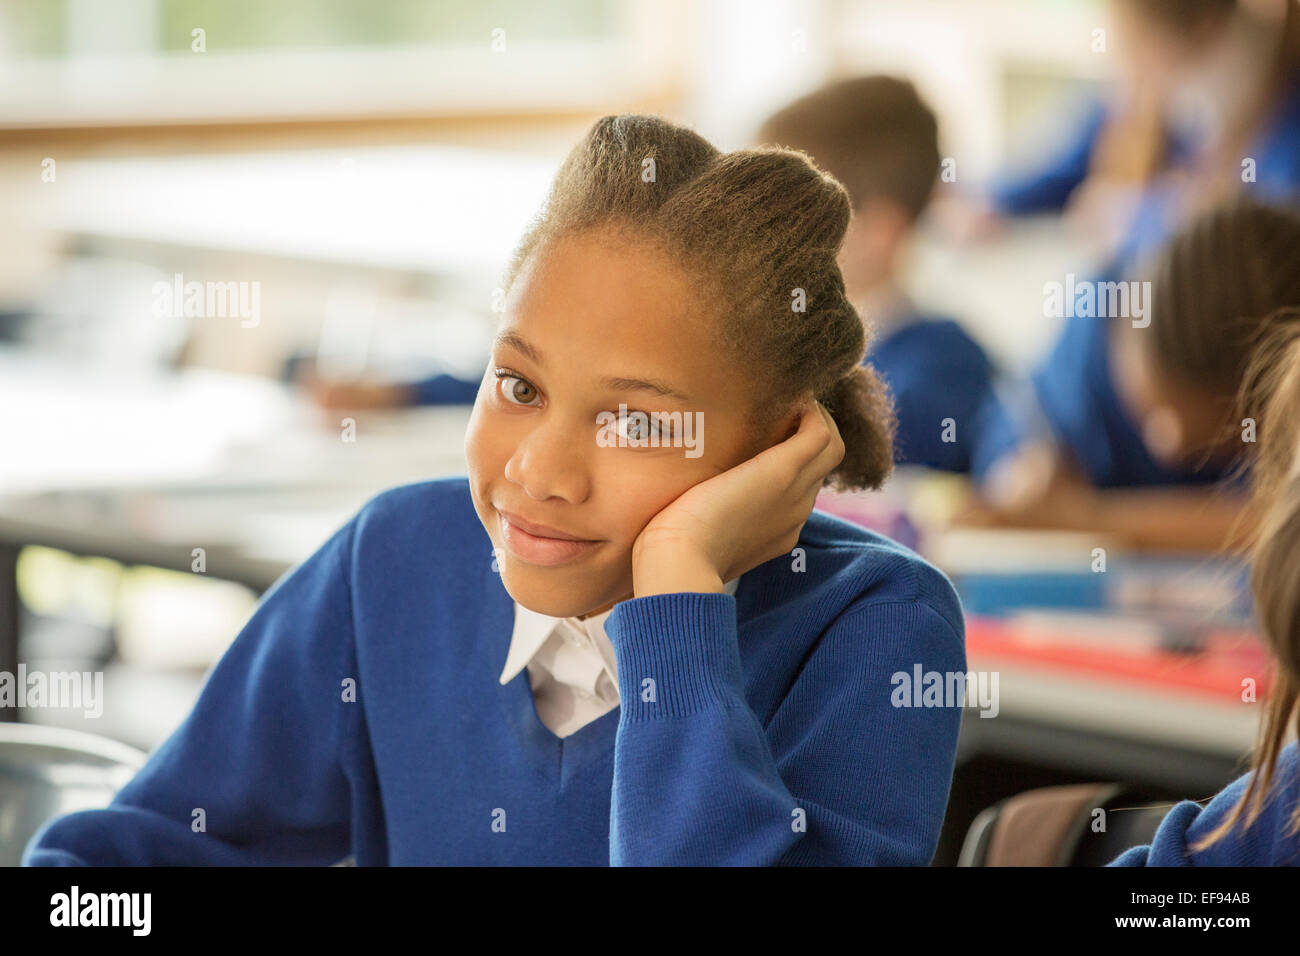 Portrait of smiling elementary school girl sitting bored in classroom Stock Photo